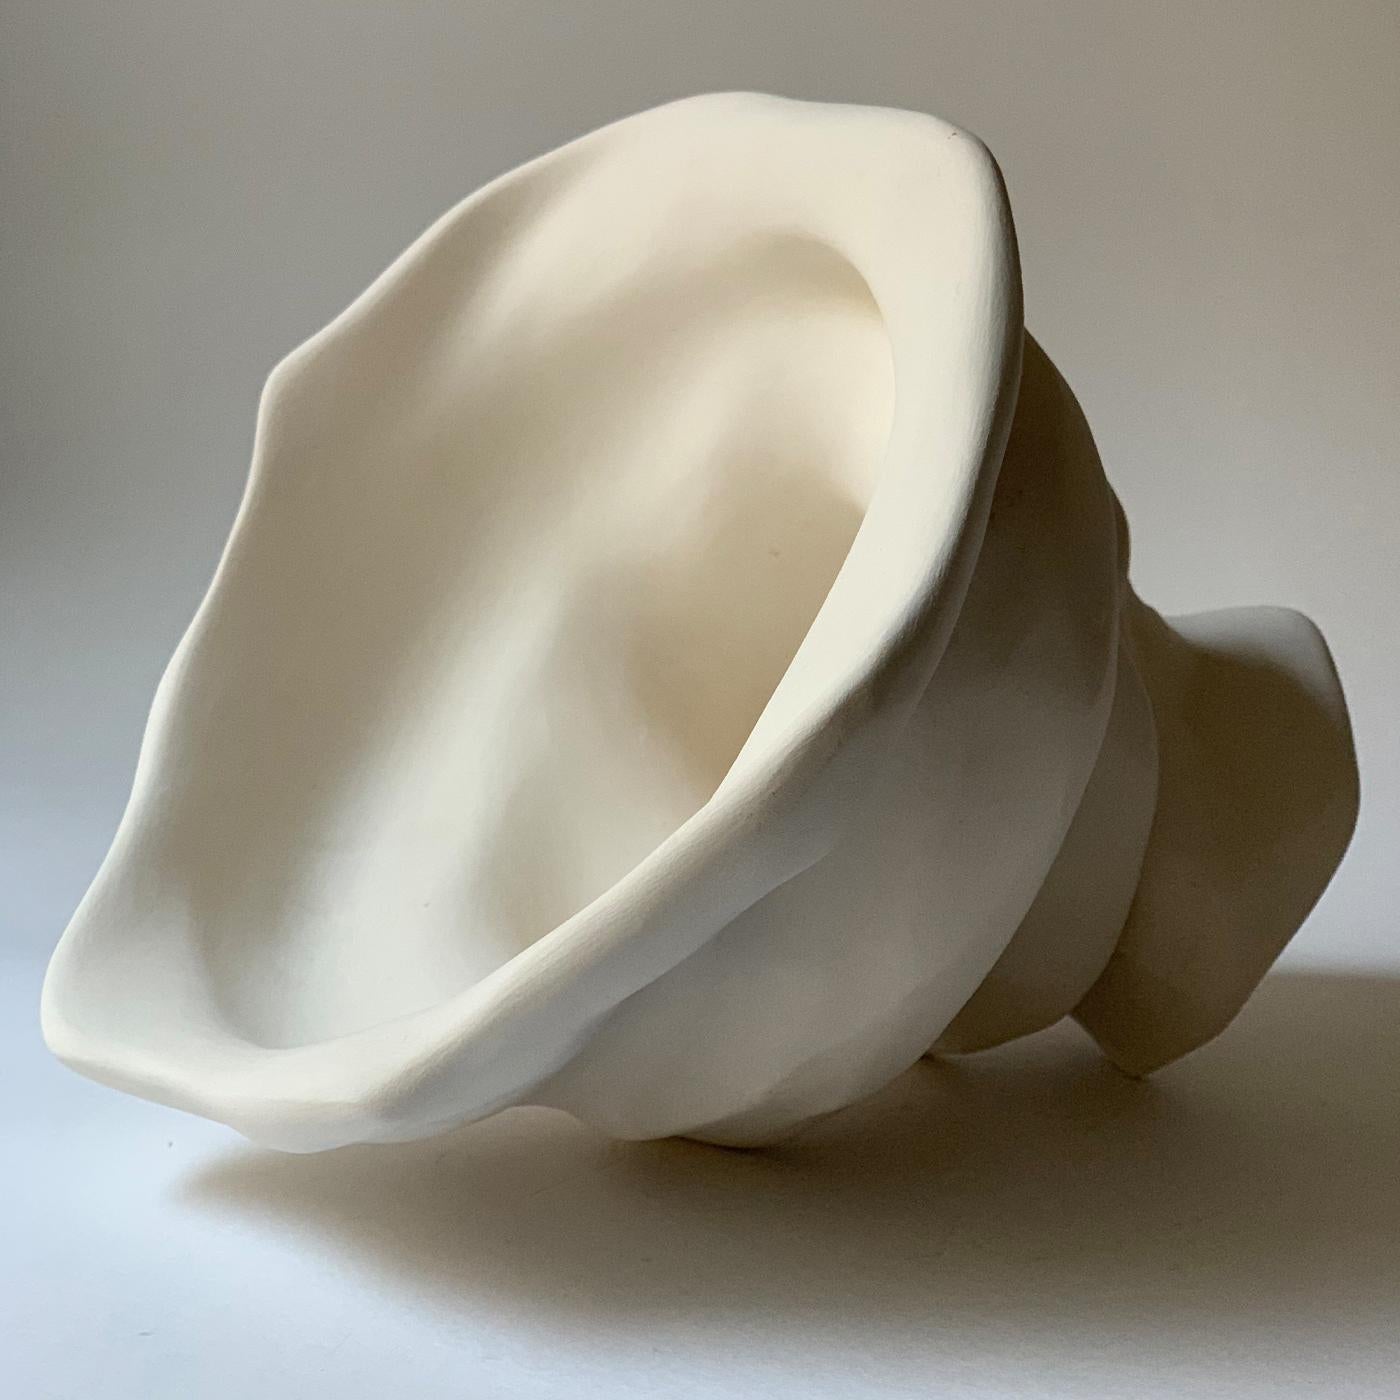 Recalling the spiraled interior of a shell, this exceptional sculpture is defined by a sinuous movement and a smooth and polished surface. Handmade of white clay, it is enhanced with a stunning play of chiaroscuro. This exquisite, one-of-a-kind